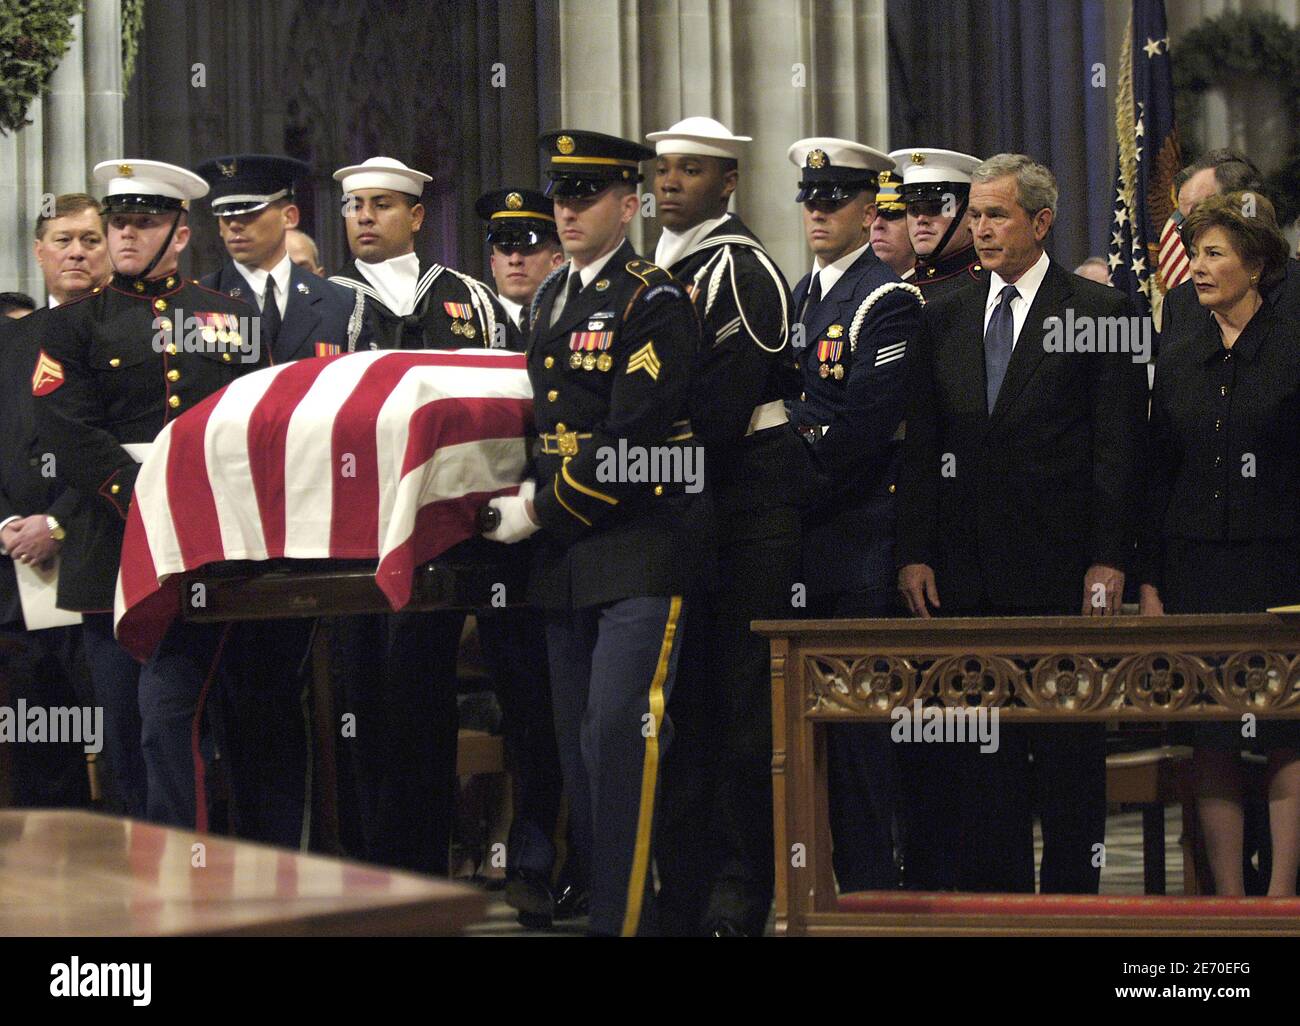 The casket of former U.S. President Gerald Ford is carried past U.S. President George W. Bush and first lady Laura Bush during Ford's state funeral at the National Cathedral in Washington D.C., USA on January 2, 2007. Photo by DOD via ABACAPRESS.COM Stock Photo